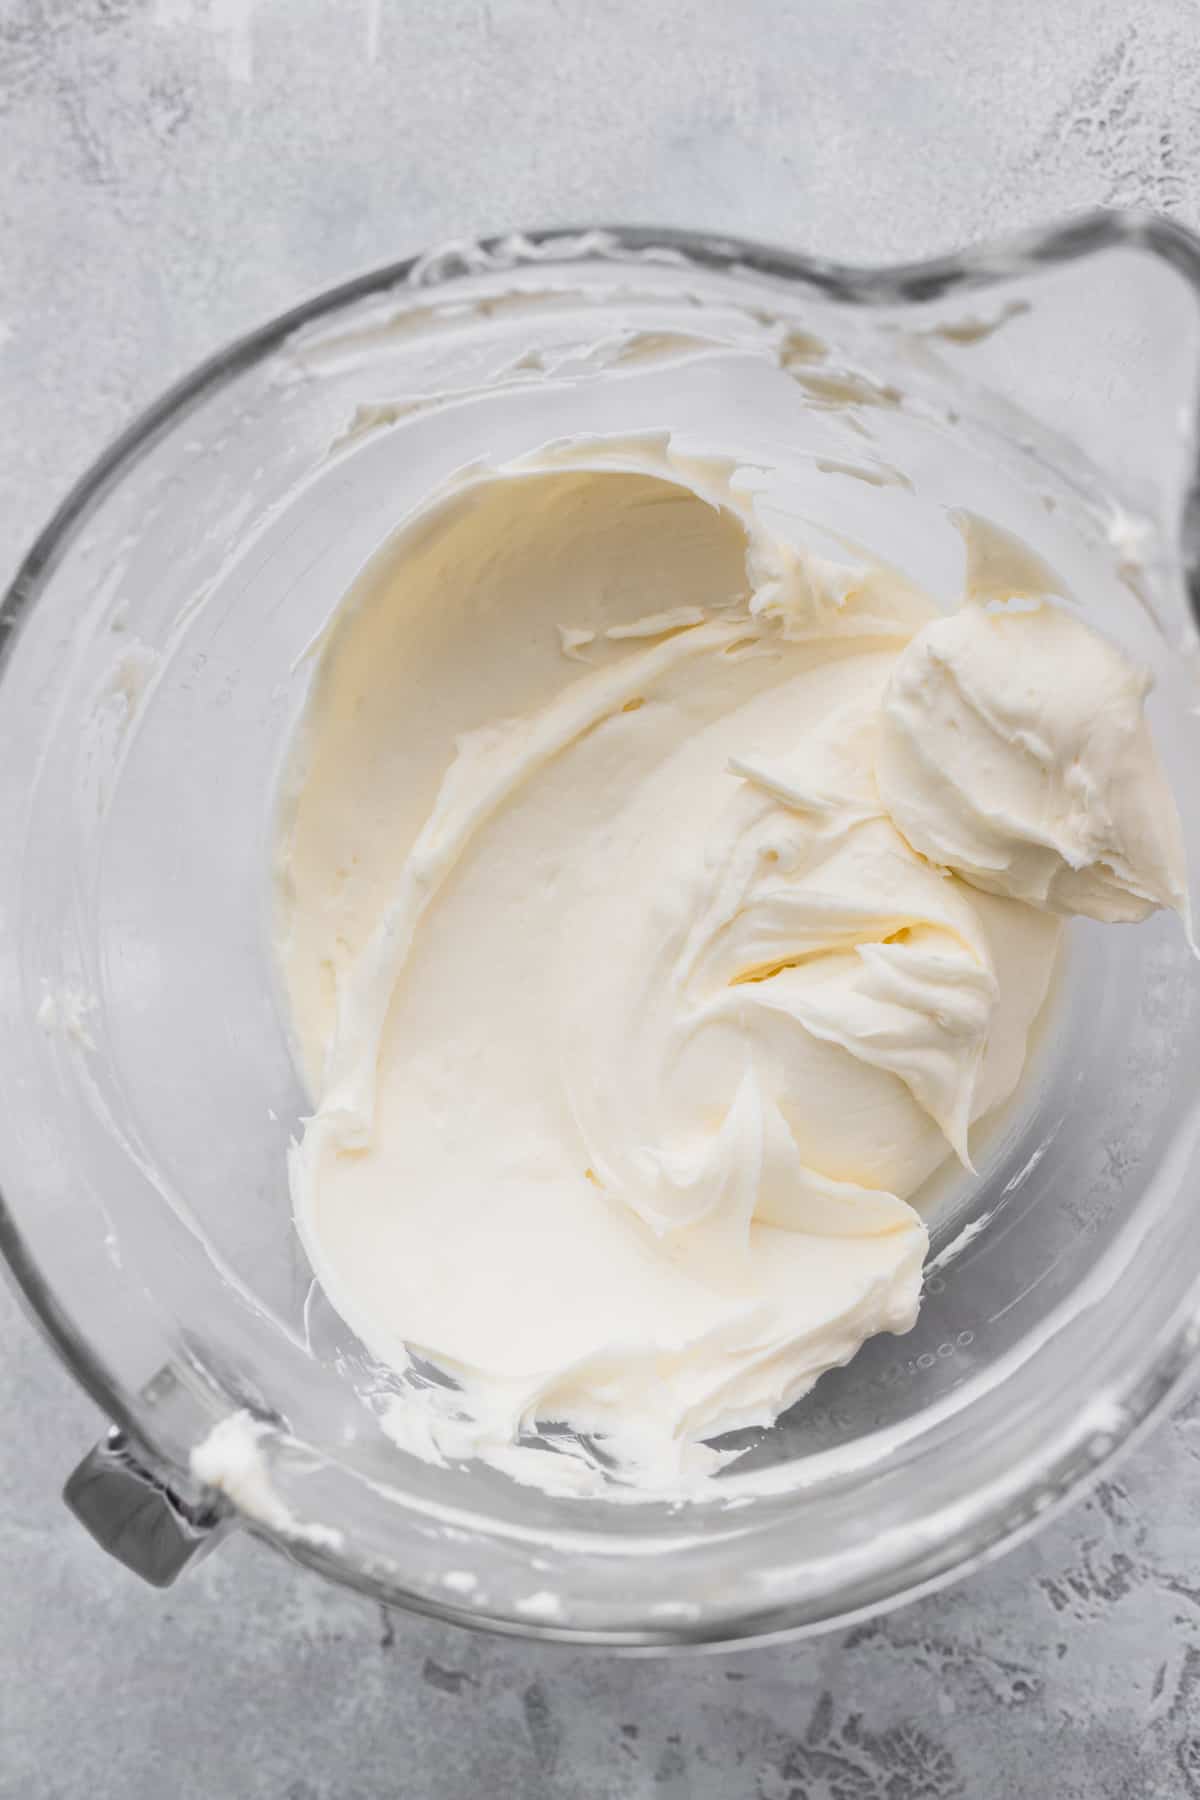 Beaten cream cheese and sugar in the bowl.